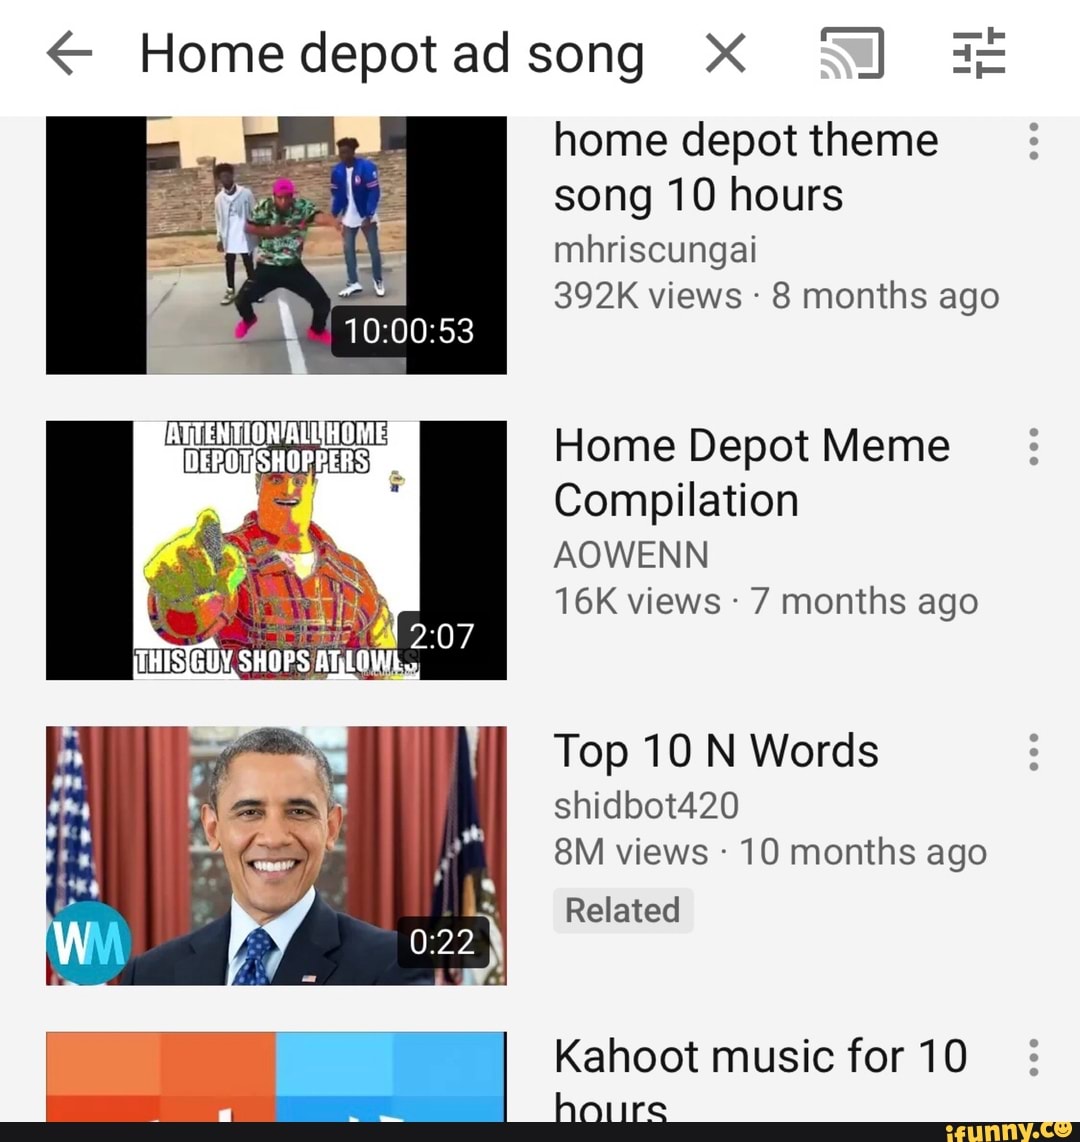 Home Depotadsong X Sw Je 10 00 53 Home Depot Theme Song 10 Hours Mhriscungai 392k